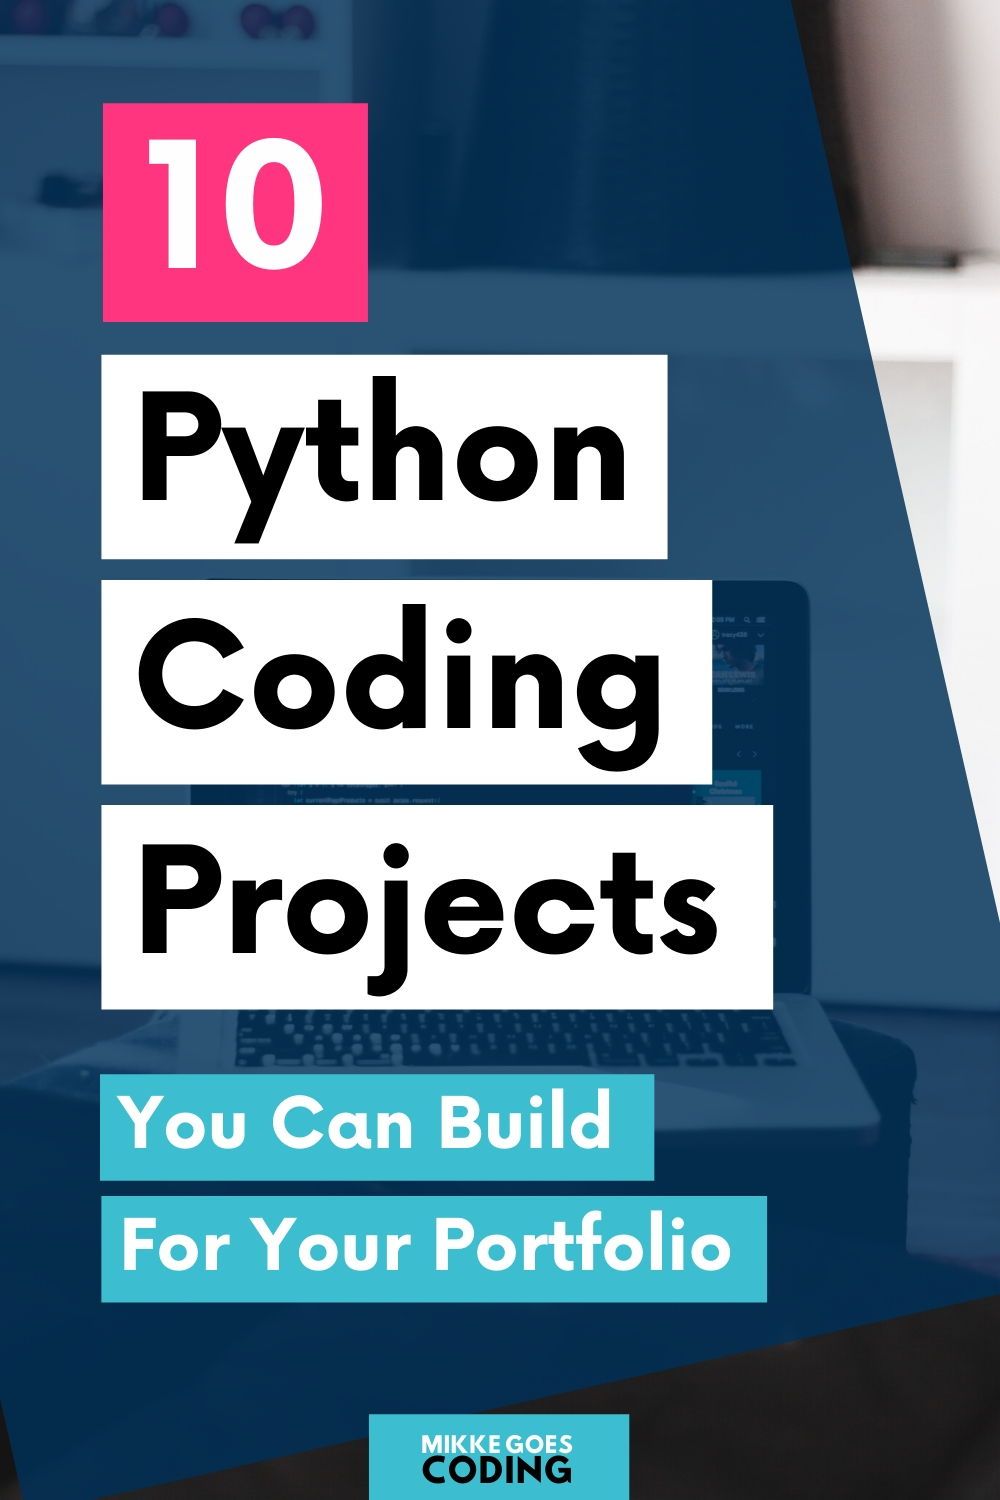 Python Projects for Beginners: 10 Easy Python Programming Project Ideas